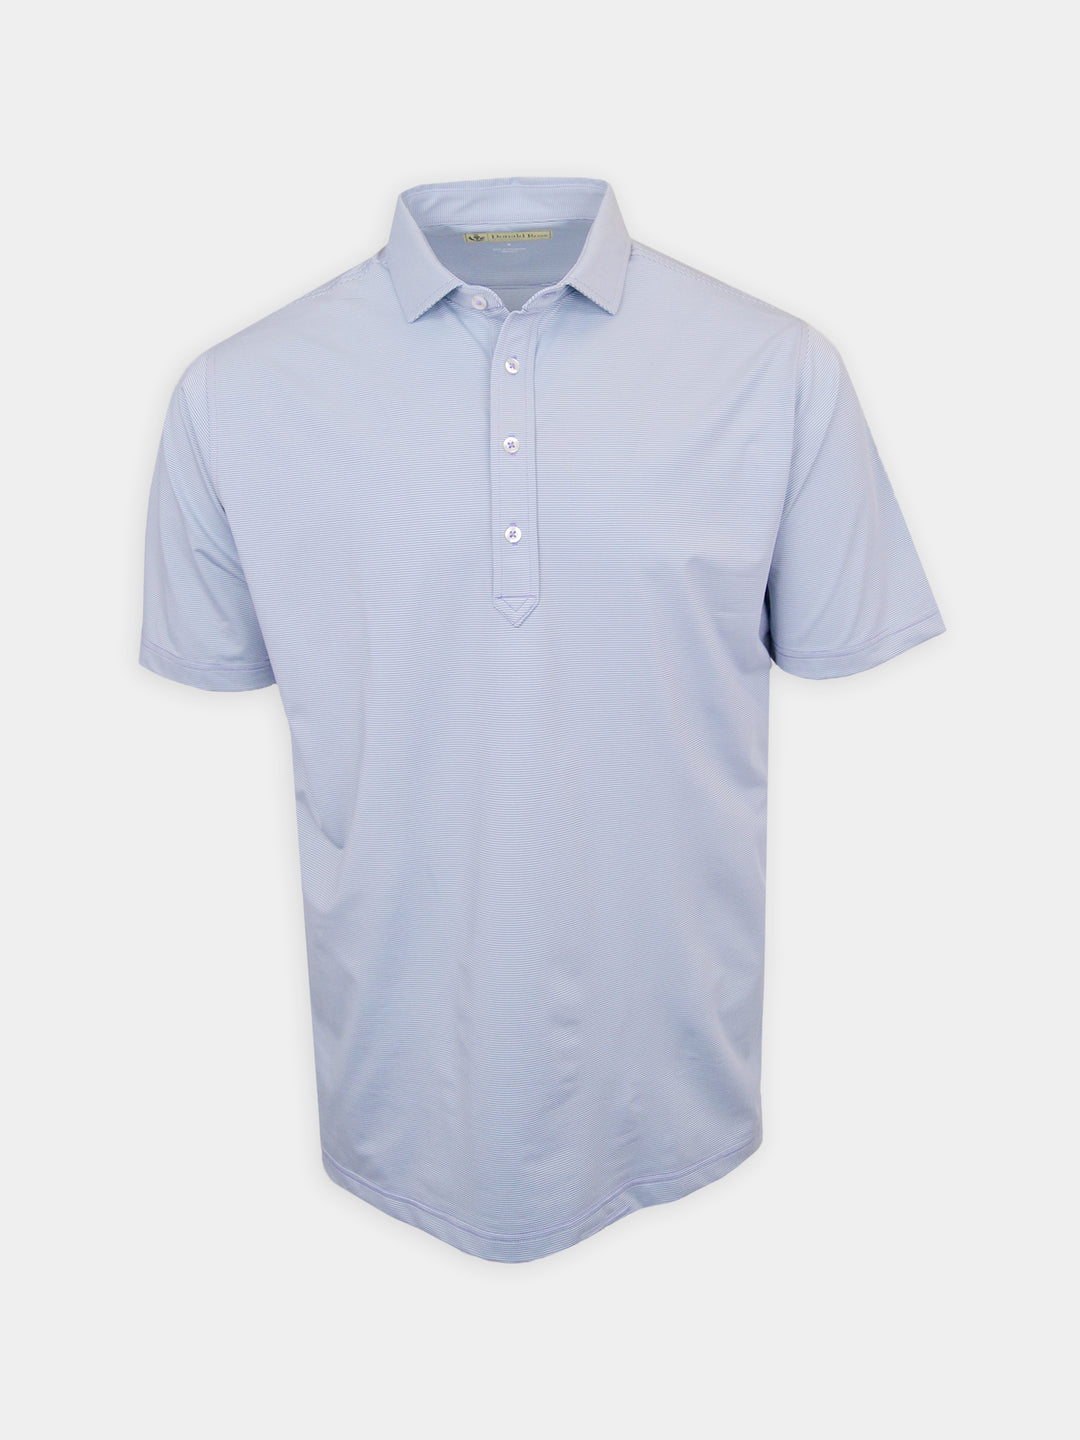 Donald Ross Mens Classic Fit Pin Stripe Polo -  LILAC CUCUMBER